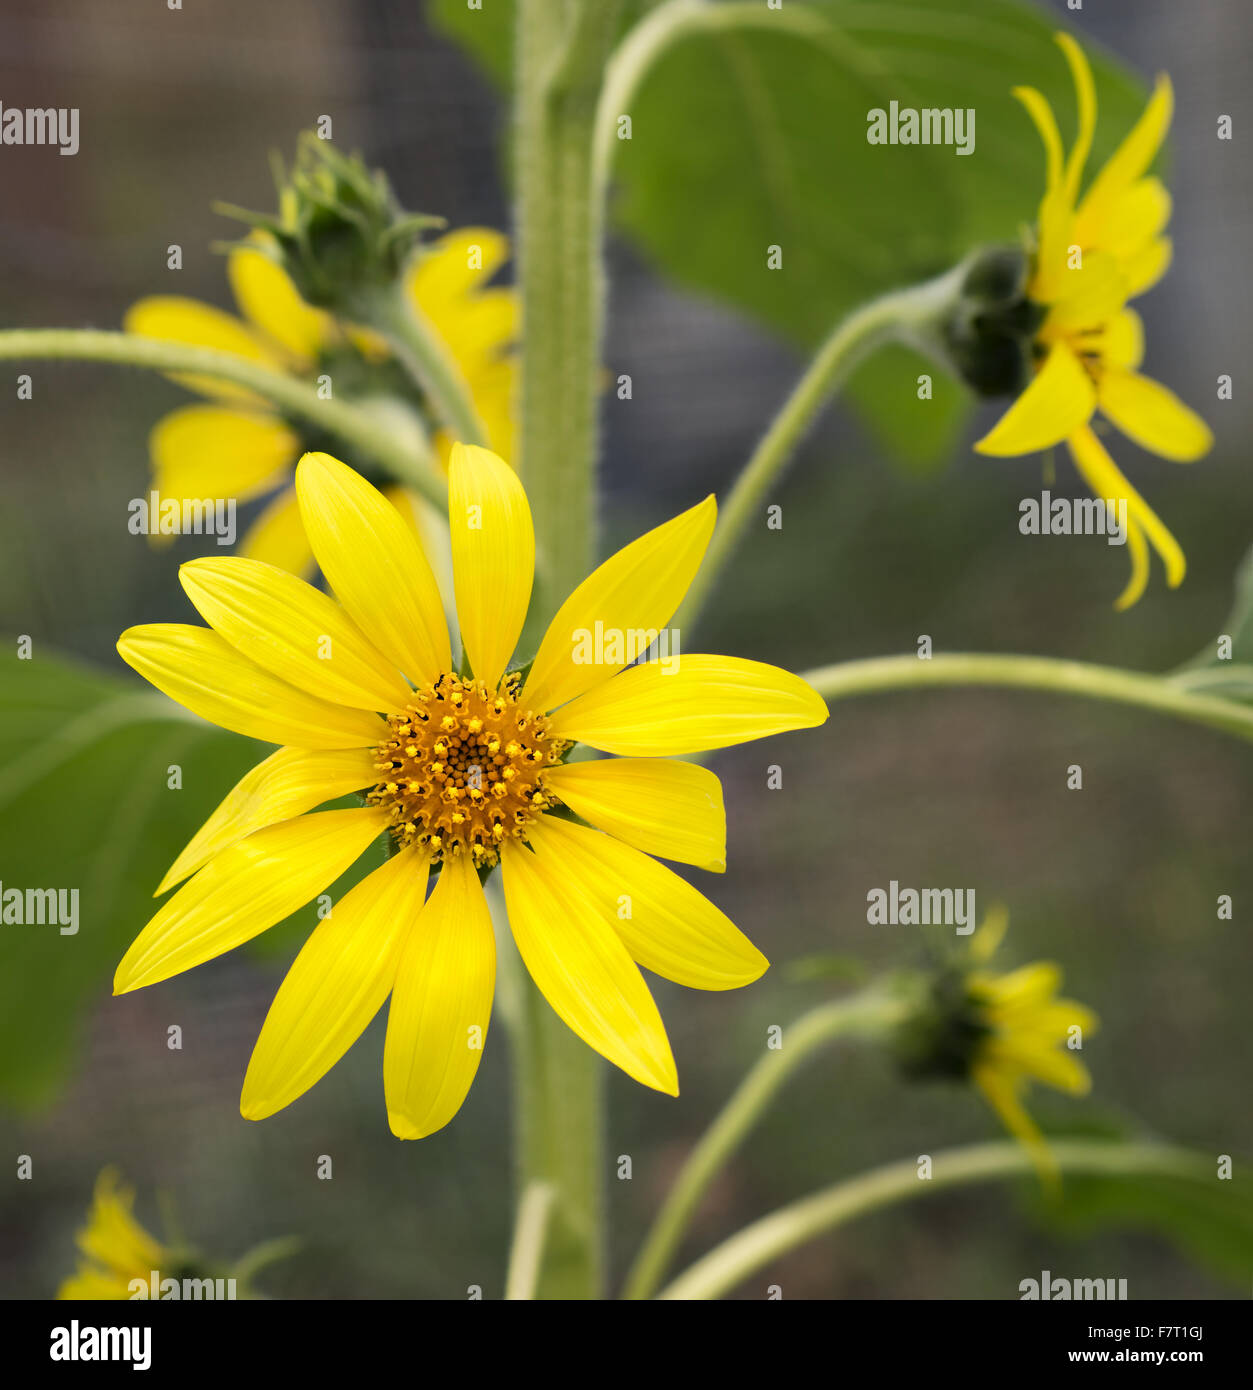 Bright golden sunflowers, happy yellow flowers  growing in the garden, symbolic of bounty, harvest, provision, vitality, energy, Stock Photo